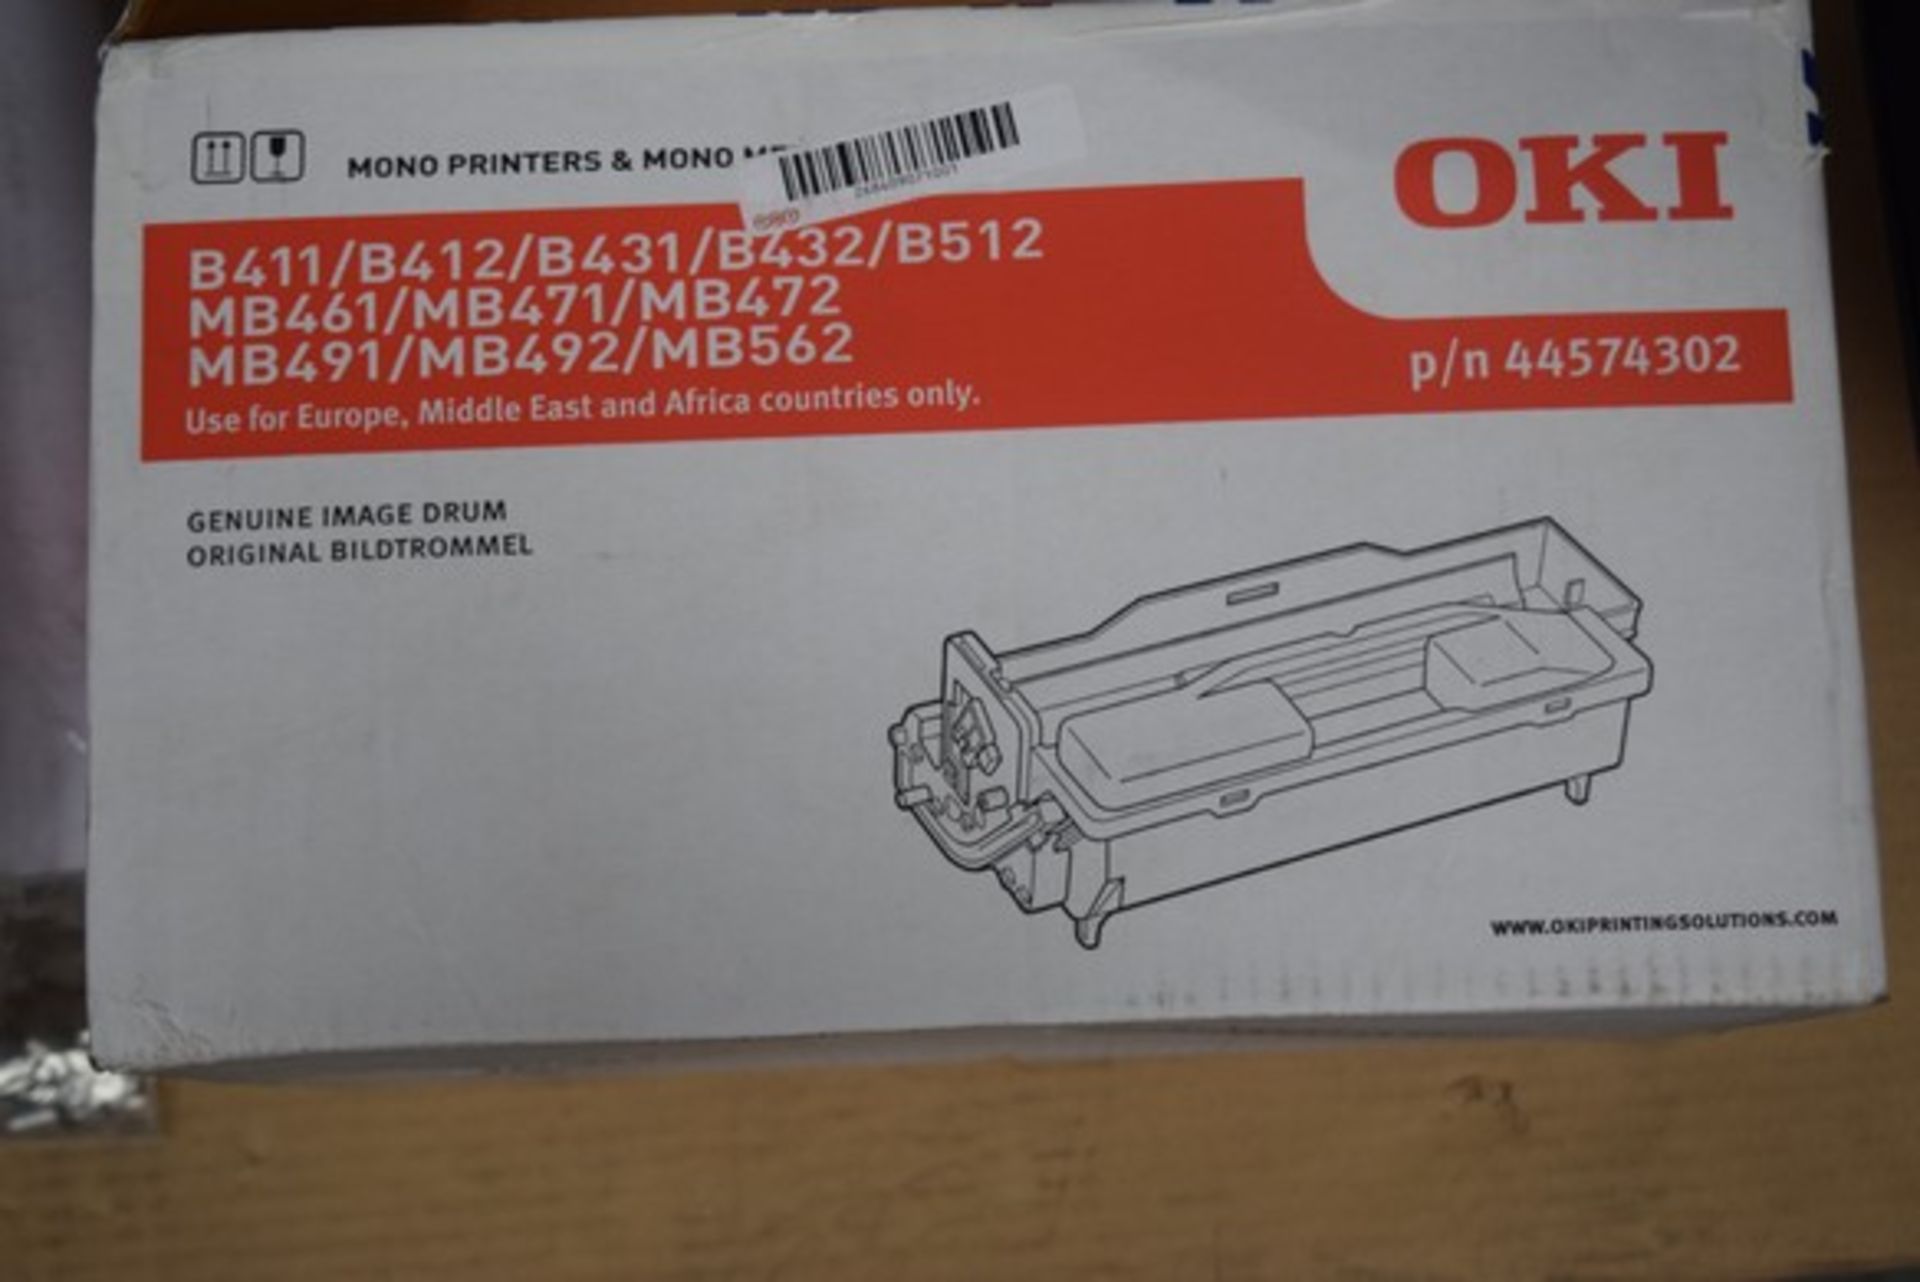 1 x BOXED OKI GENUINE IMAGE DRUM FOR B411 /12 PRINTERS RRP £30 13.06.17 (AC) *PLEASE NOTE THAT THE